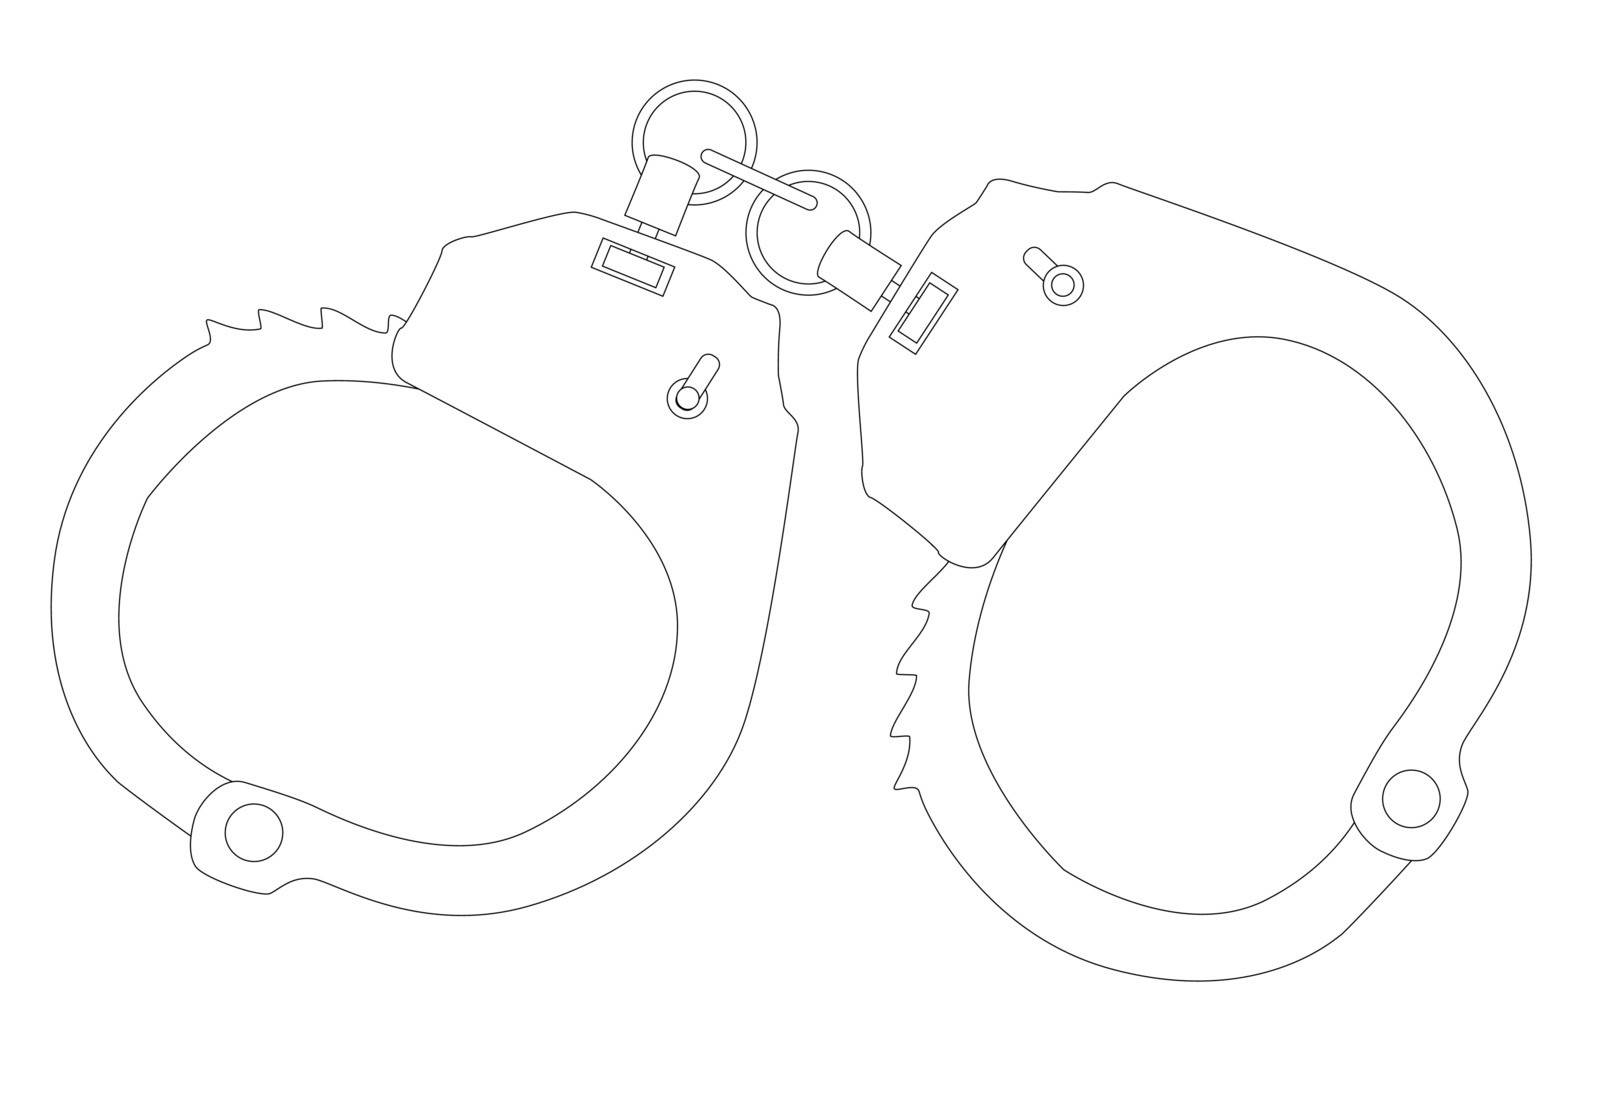 A set of metal handcuffs in ouline over a white background.